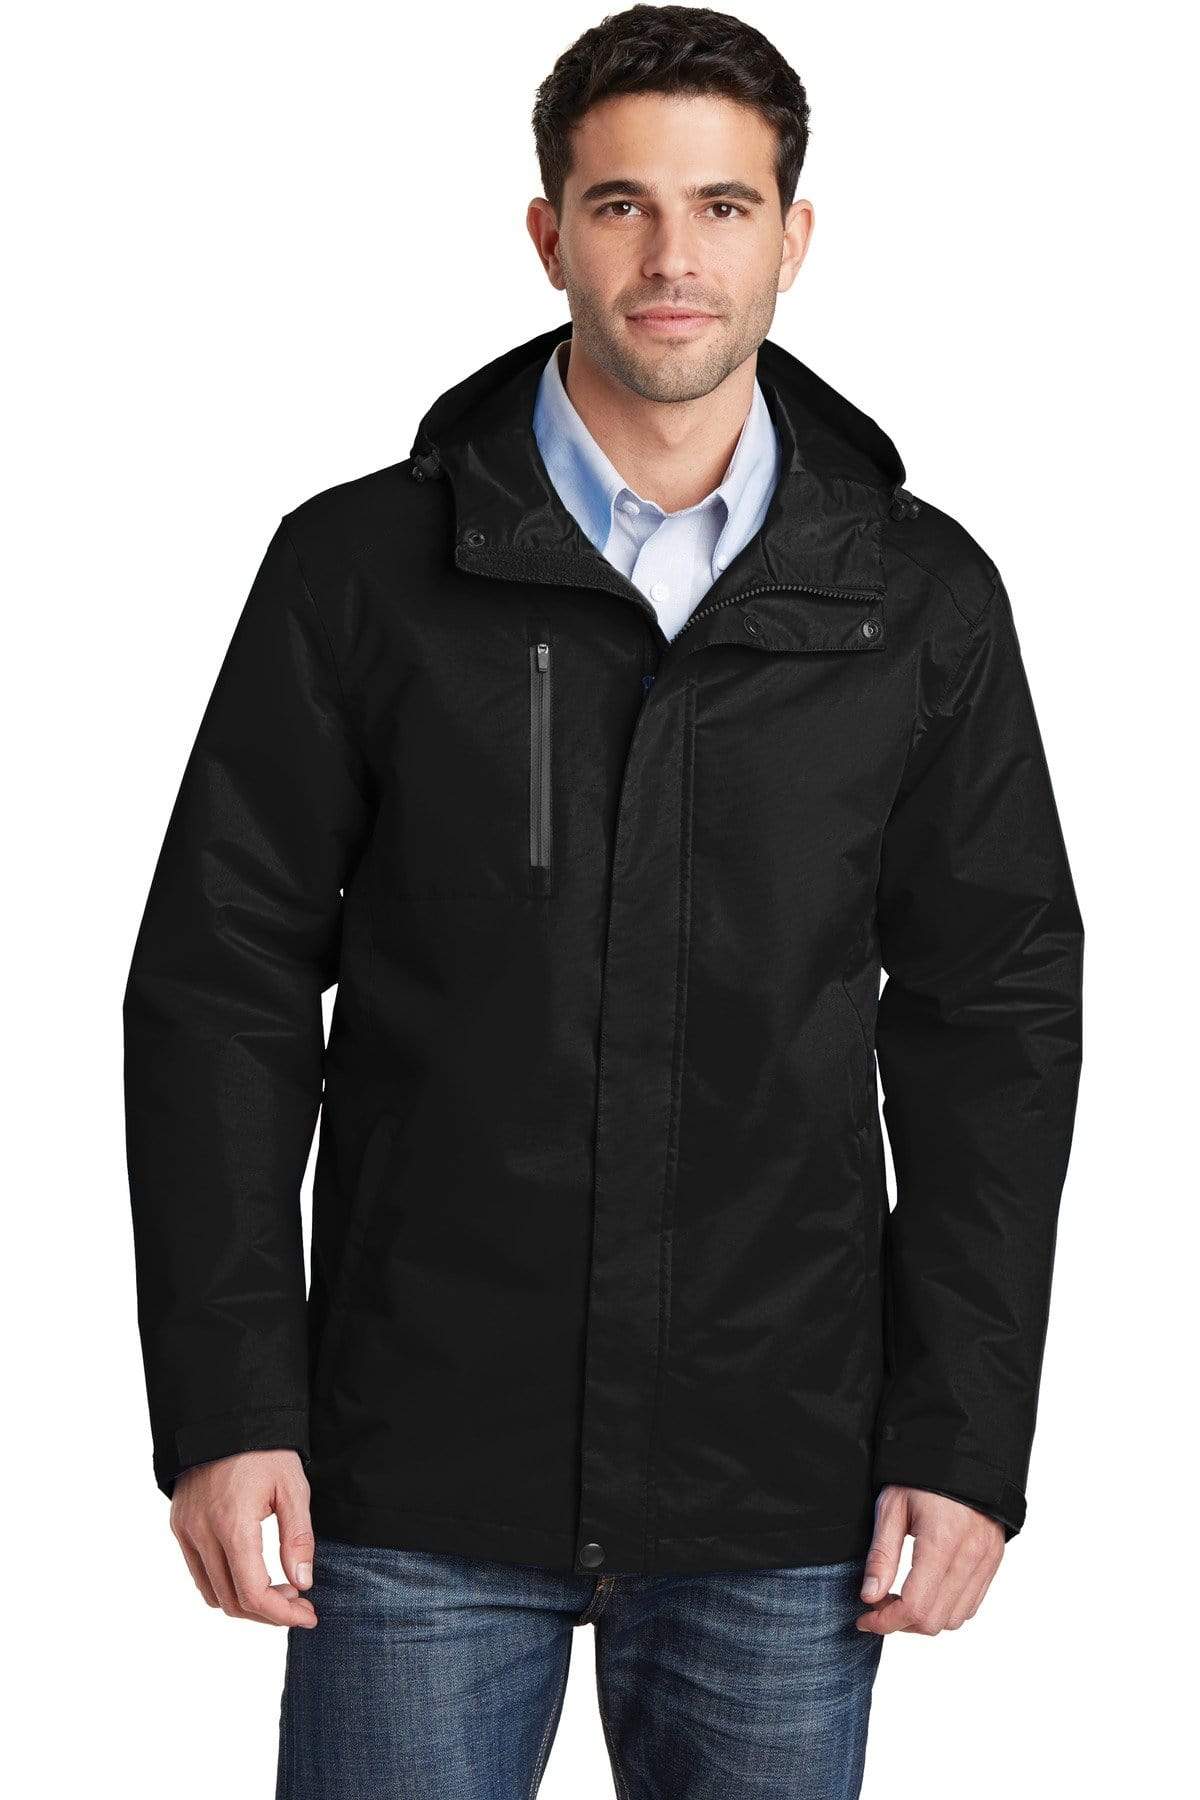 Port Authority All-Conditions Jacket J33116945